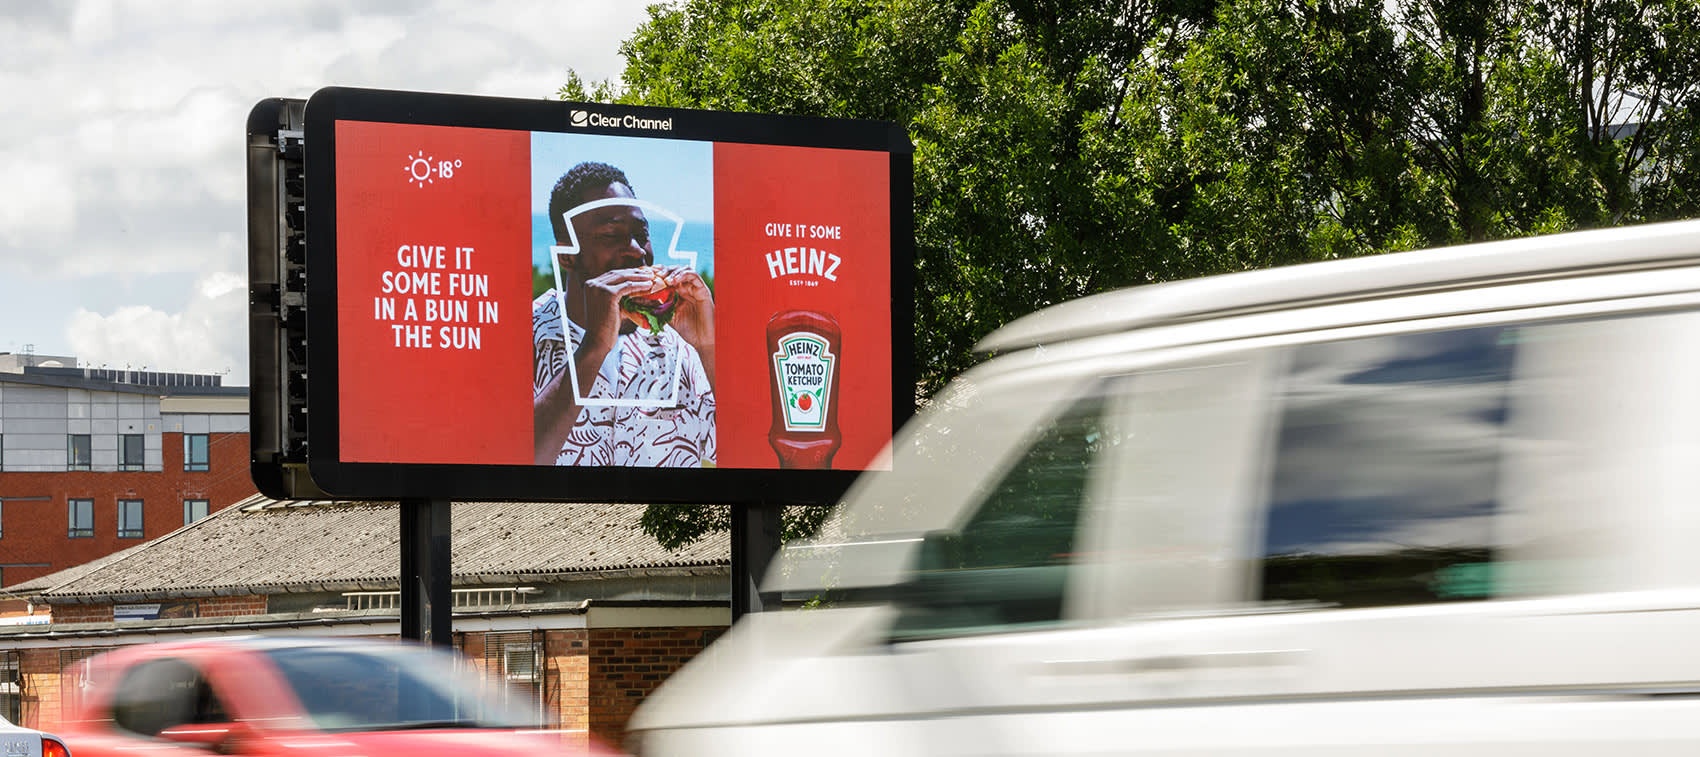 Tomato sauce advert with live temperature on a roadside digital billboard in summer